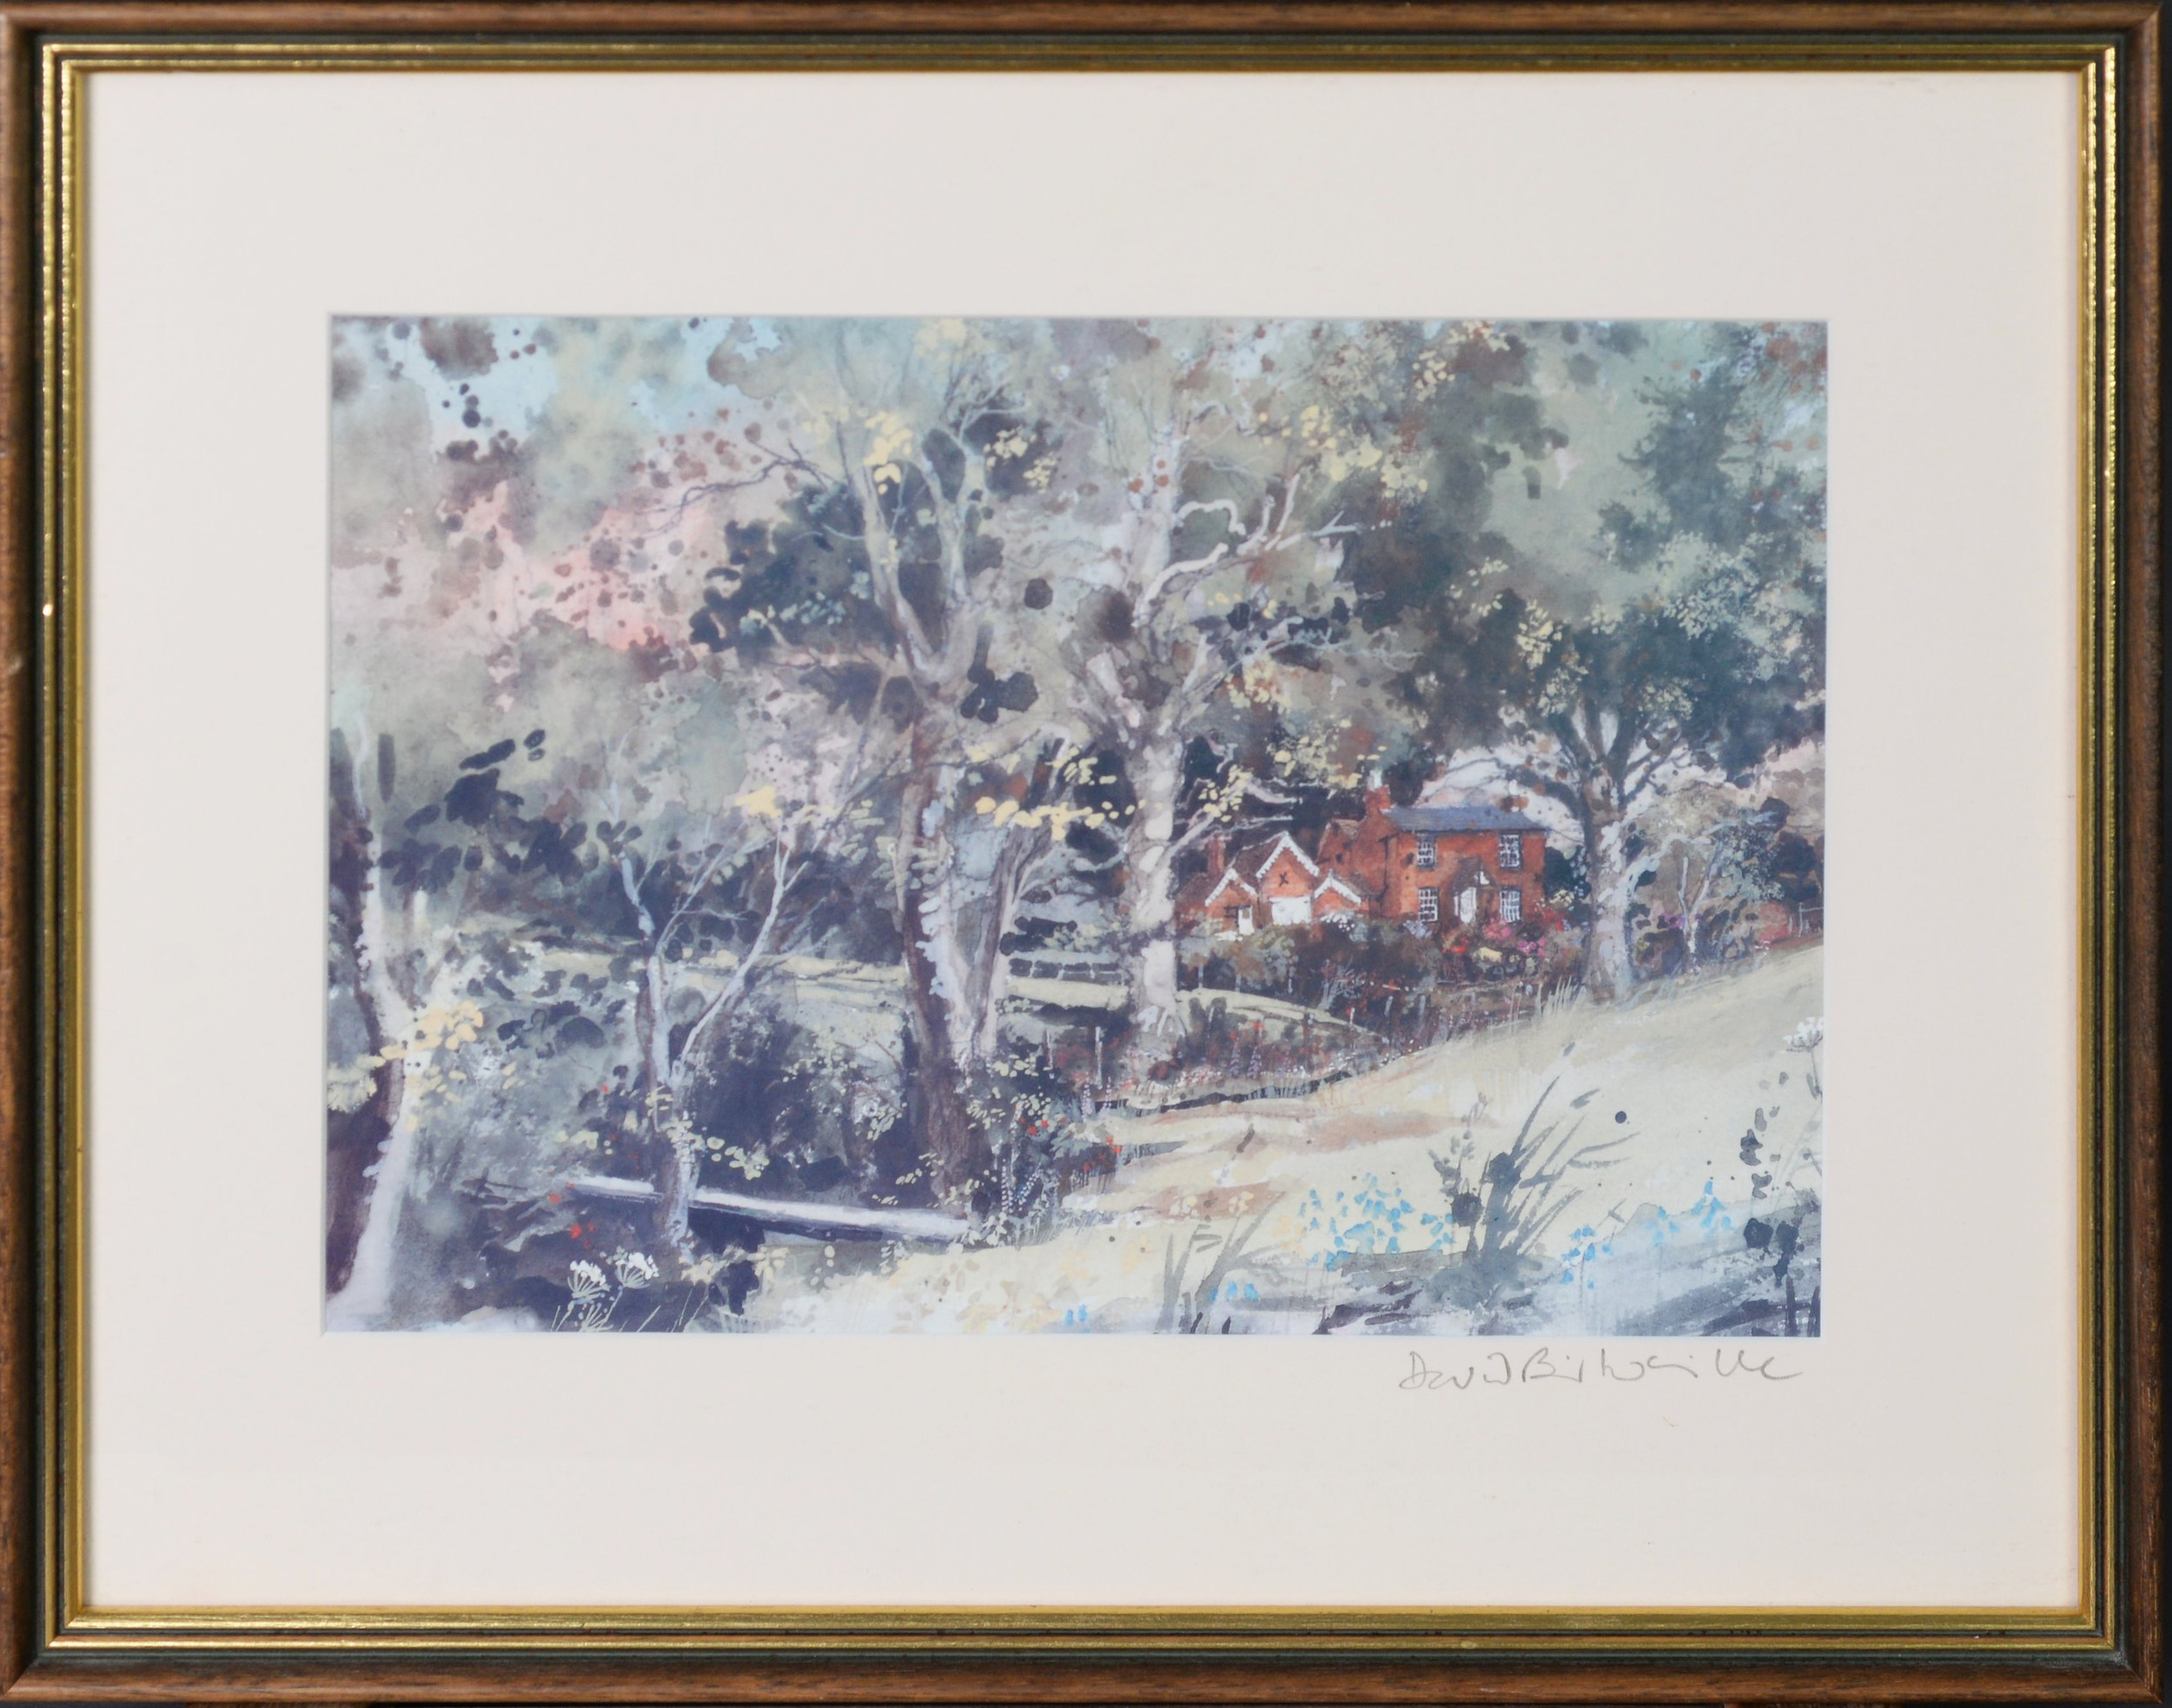 NORMAN PERRYMAN LIMITED EDITION LITHOGRAPH Published by the Elgar Birthplace Appeal, from a - Image 5 of 6